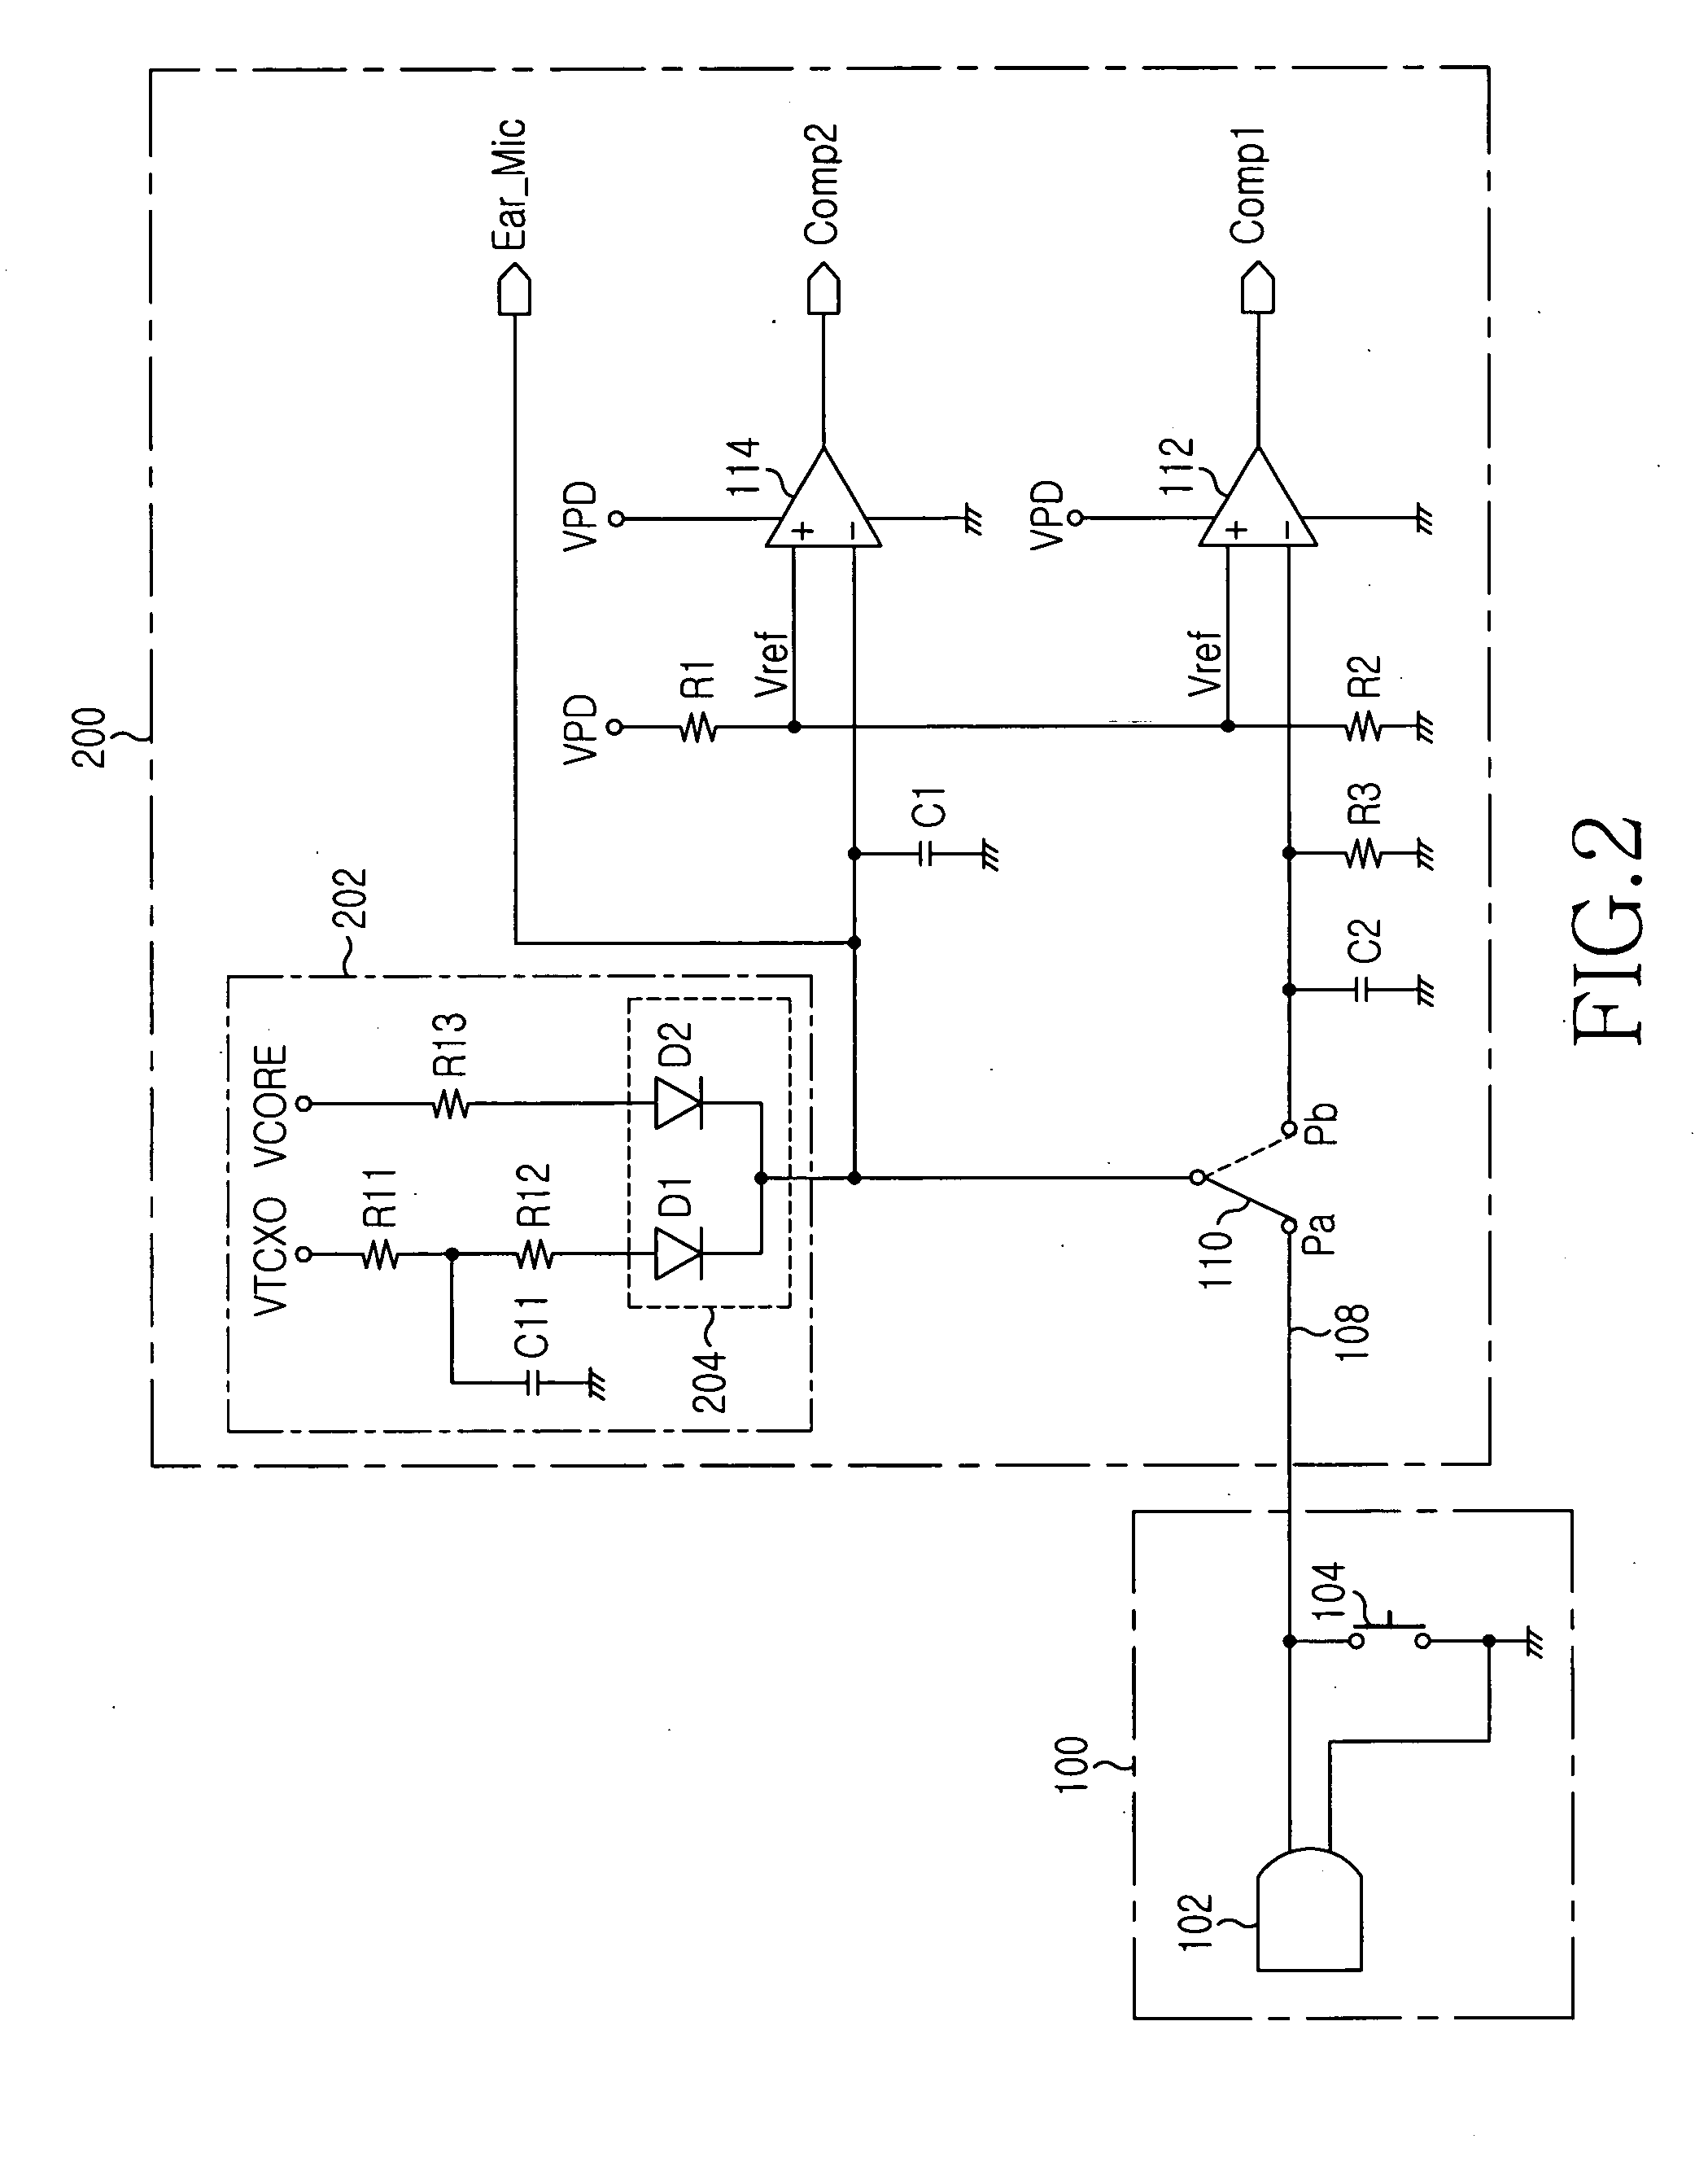 Circuit for supplying ear-microphone bias power for ear/microphone in mobile terminal